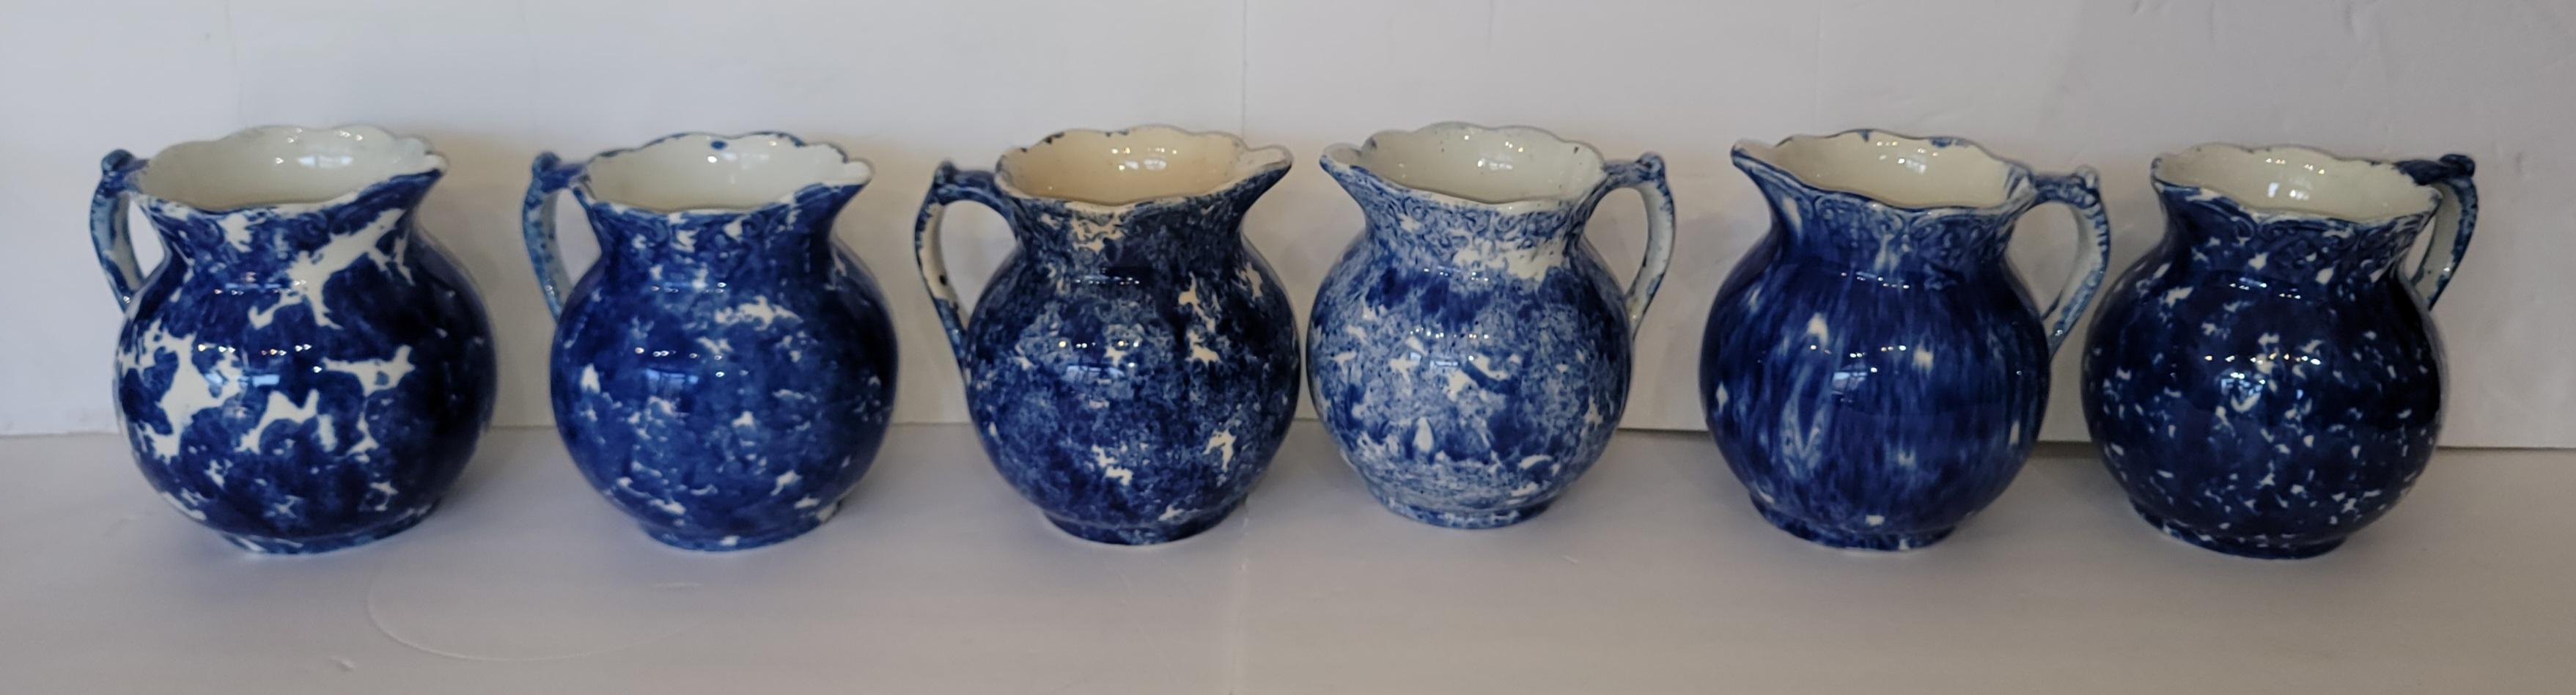 American Collection of Six 19thc Sponge Ware Bulbous Pitchers For Sale